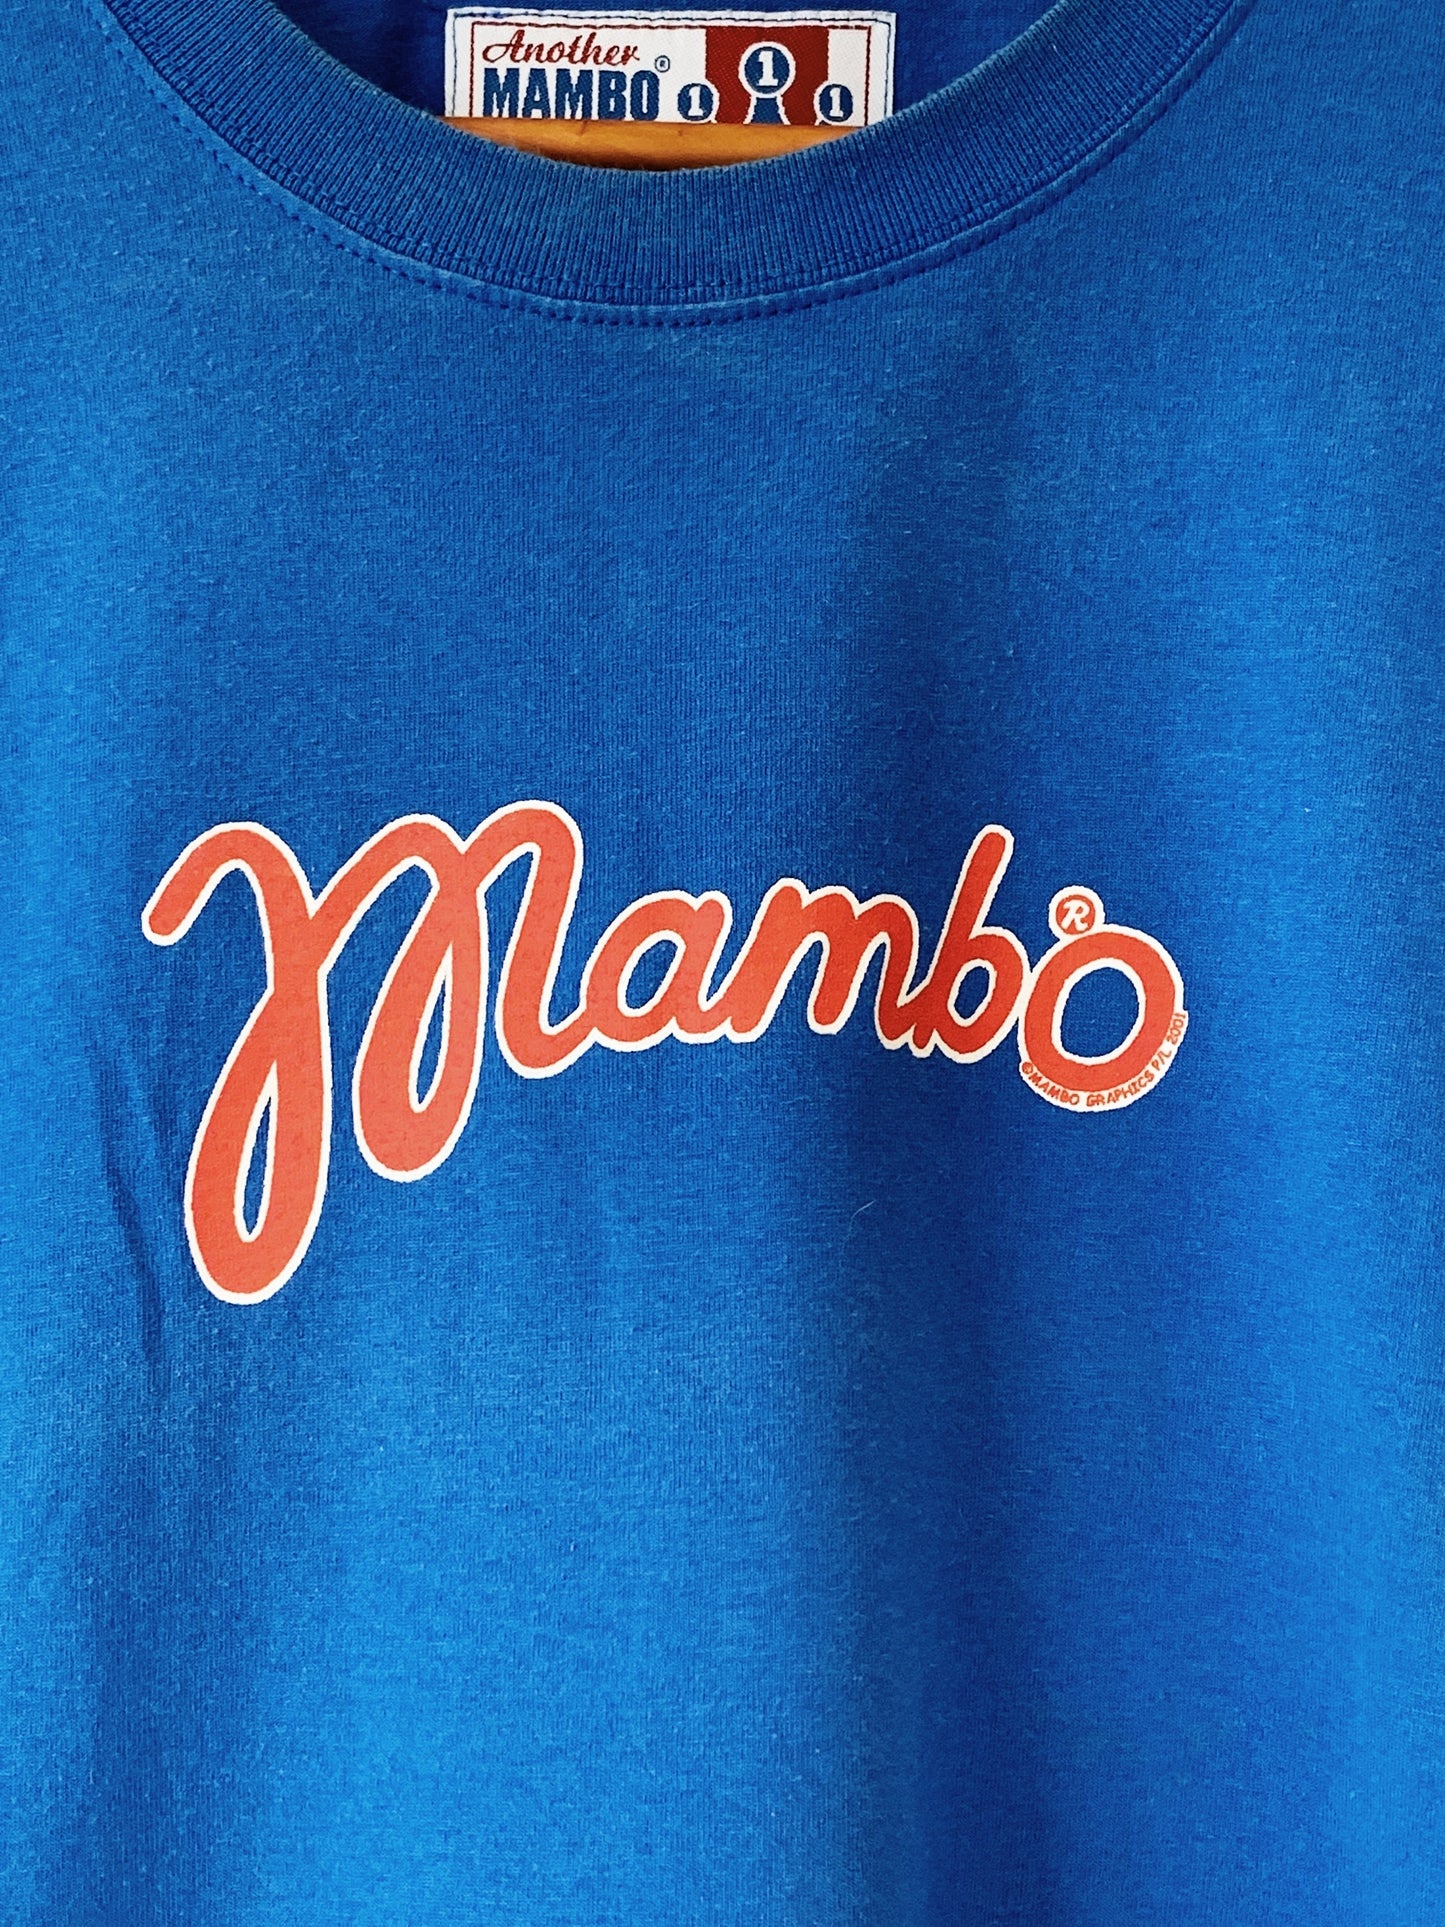 Vintage Dave McKay for Mambo "As Pointless As A Monkey Rooting A Football" '01 T-Shirt